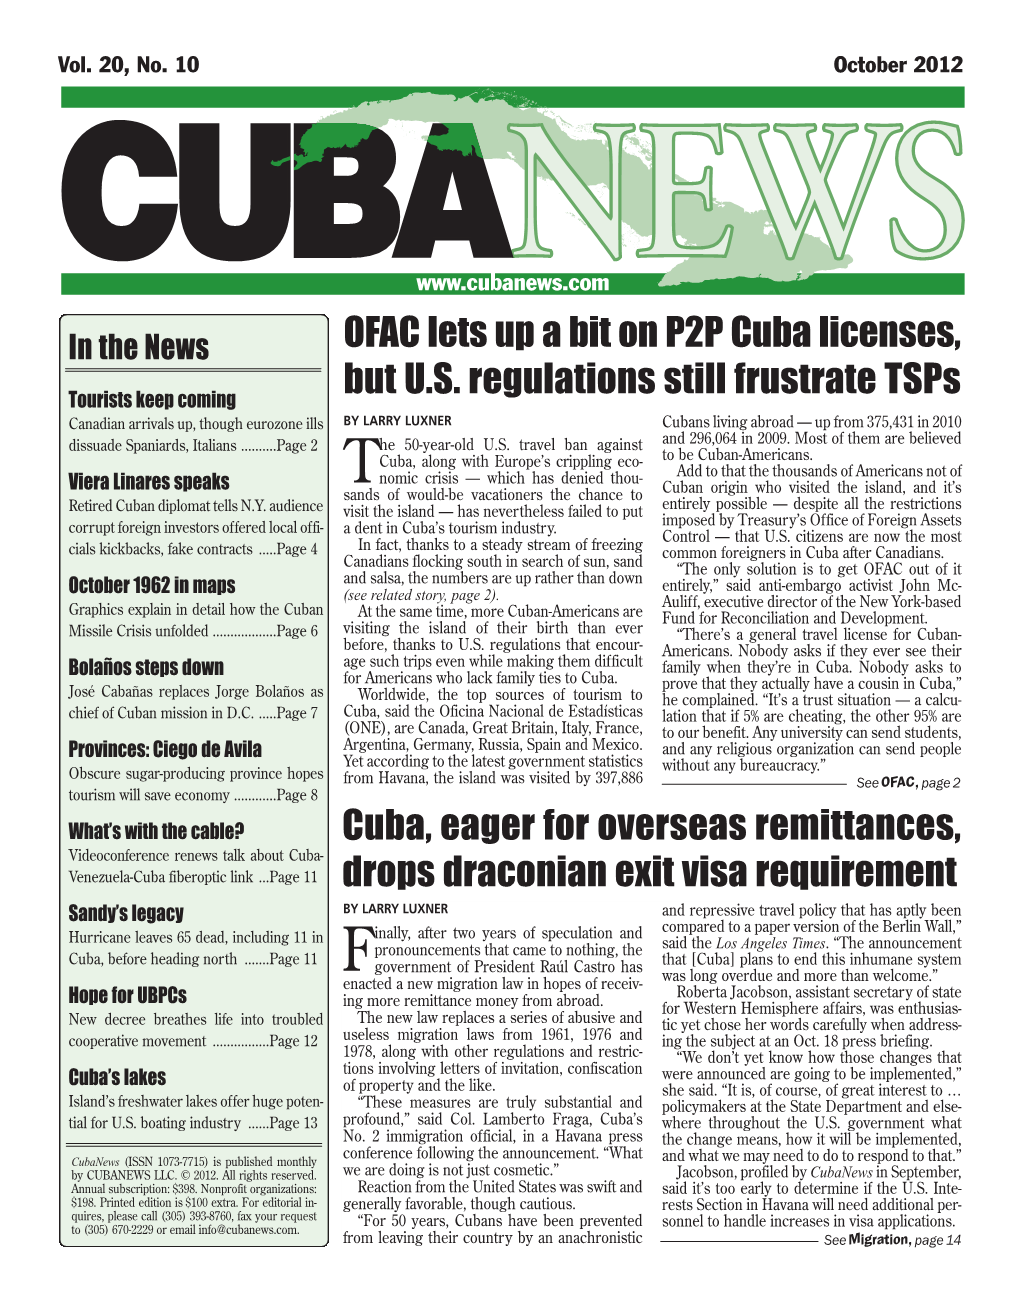 Cuba, Eager for Overseas Remittances, Drops Draconian Exit